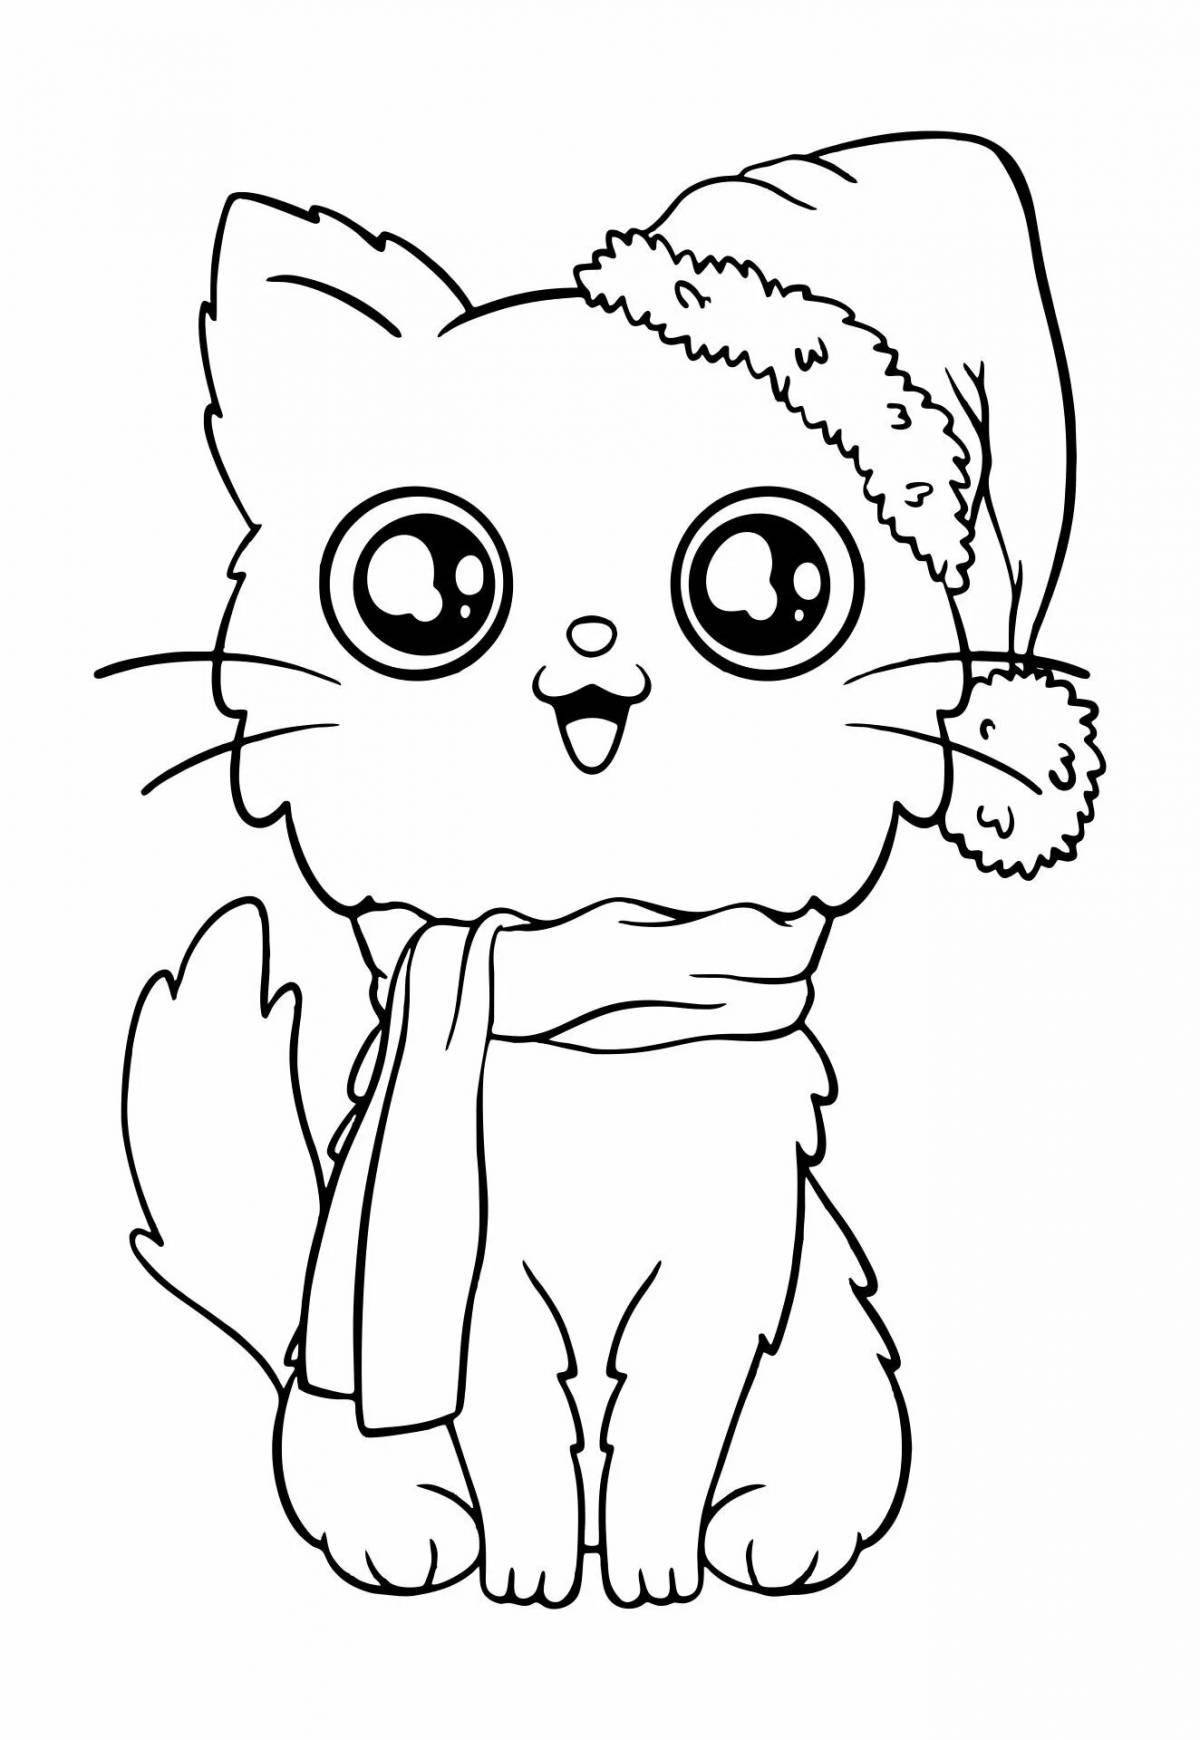 Christmas cat coloring page